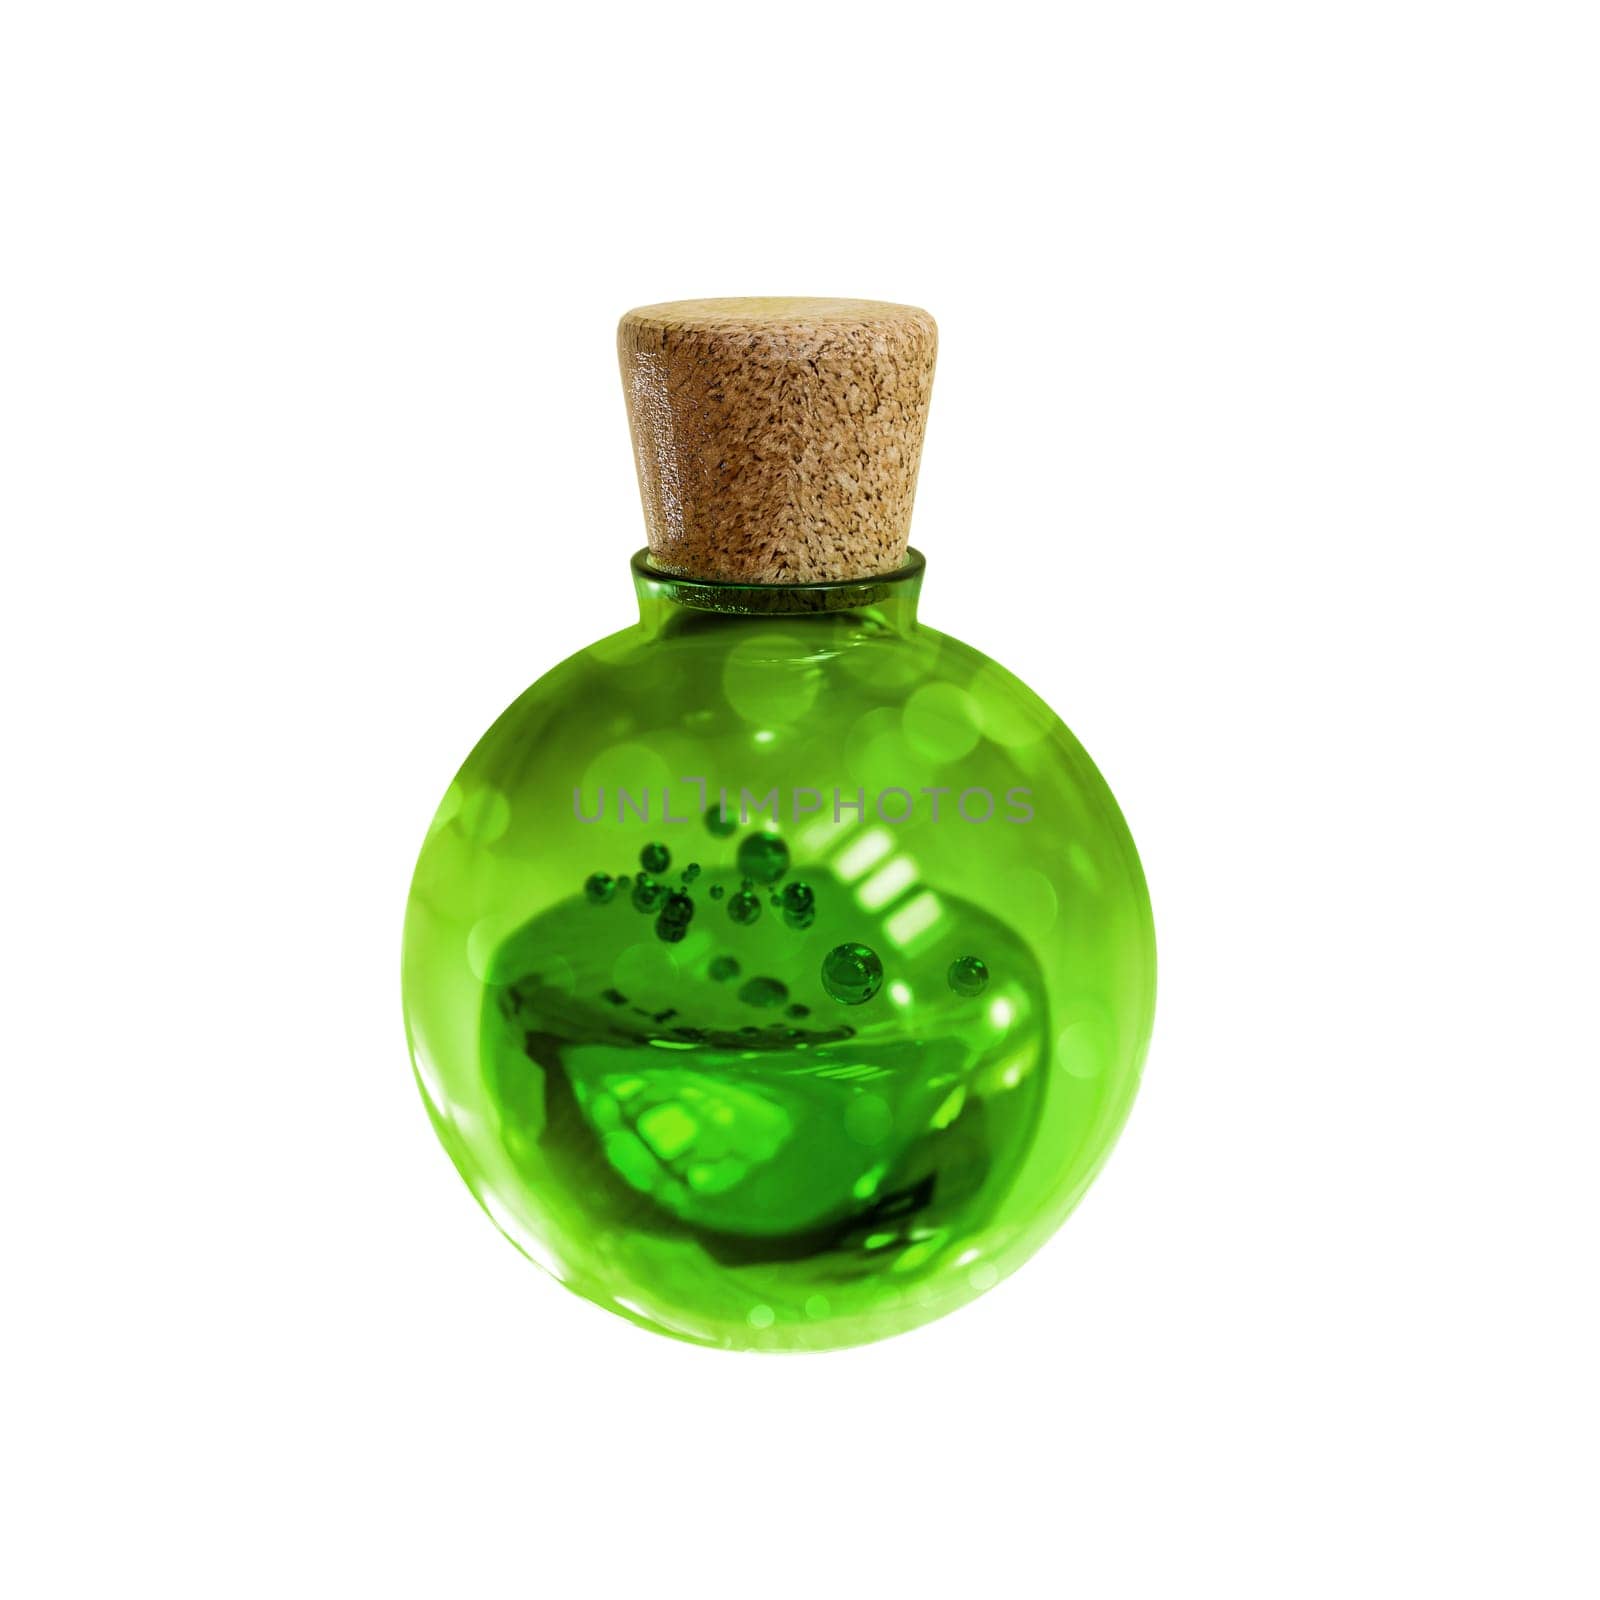 Bottle with green potion 3D rendering isolated on white background.Clipping path.